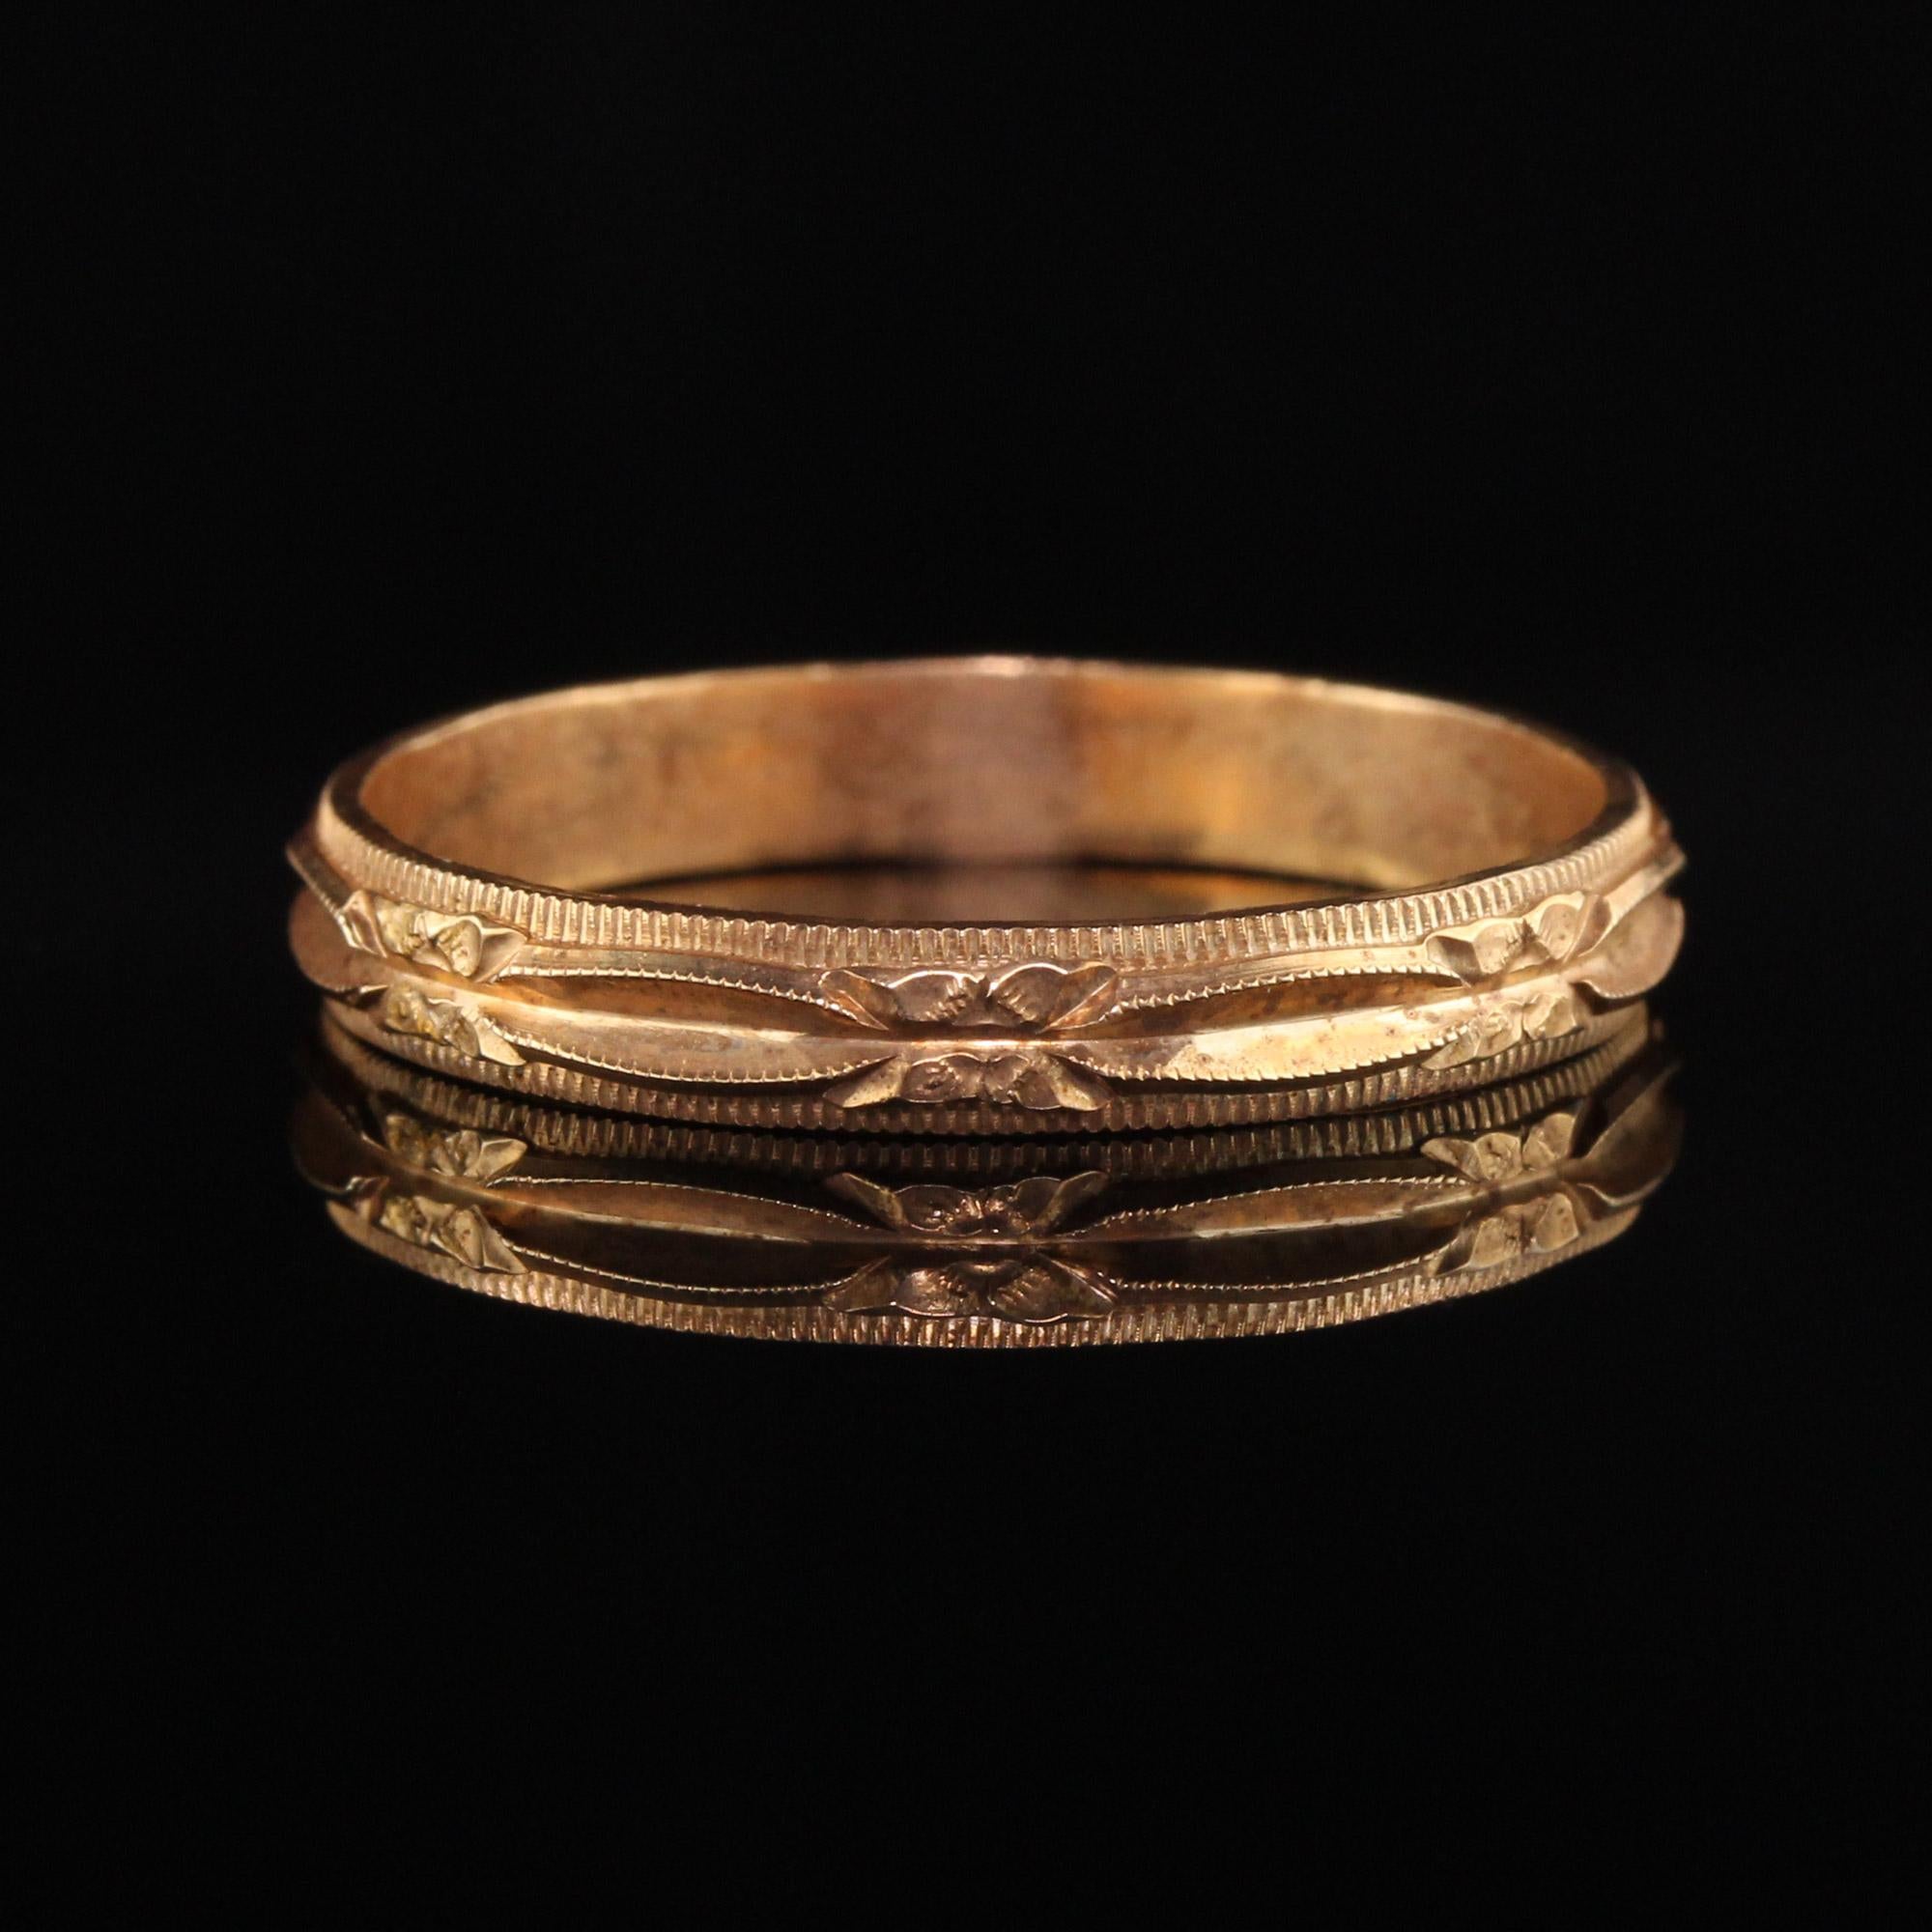 Antique Art Deco 14K Yellow Gold Engraved Wedding Band In Excellent Condition For Sale In Great Neck, NY